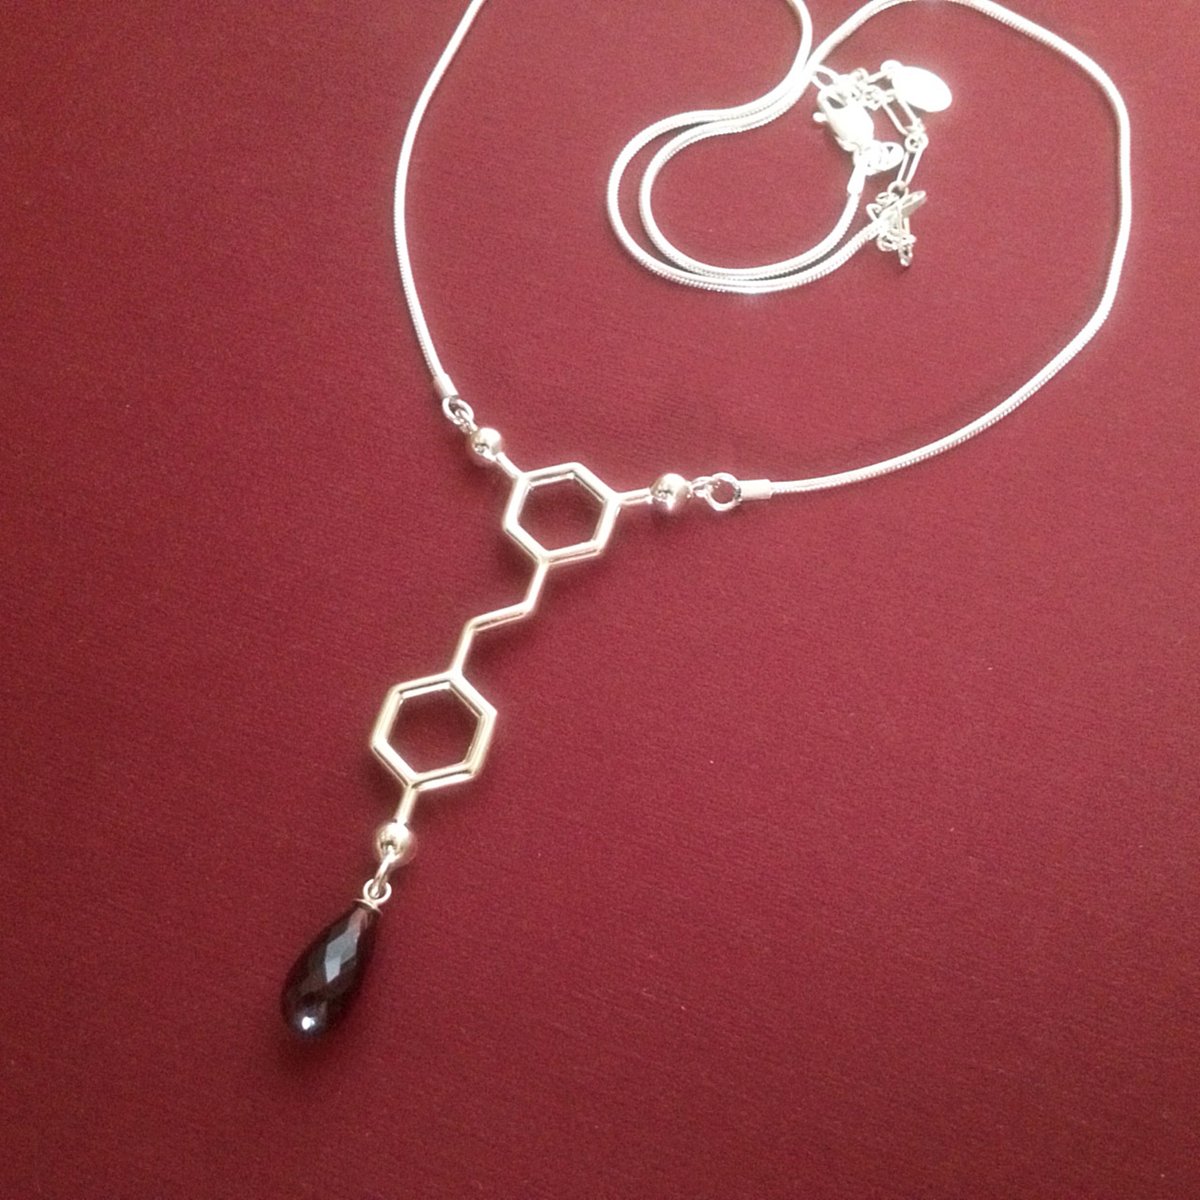 Image of resveratrol necklace